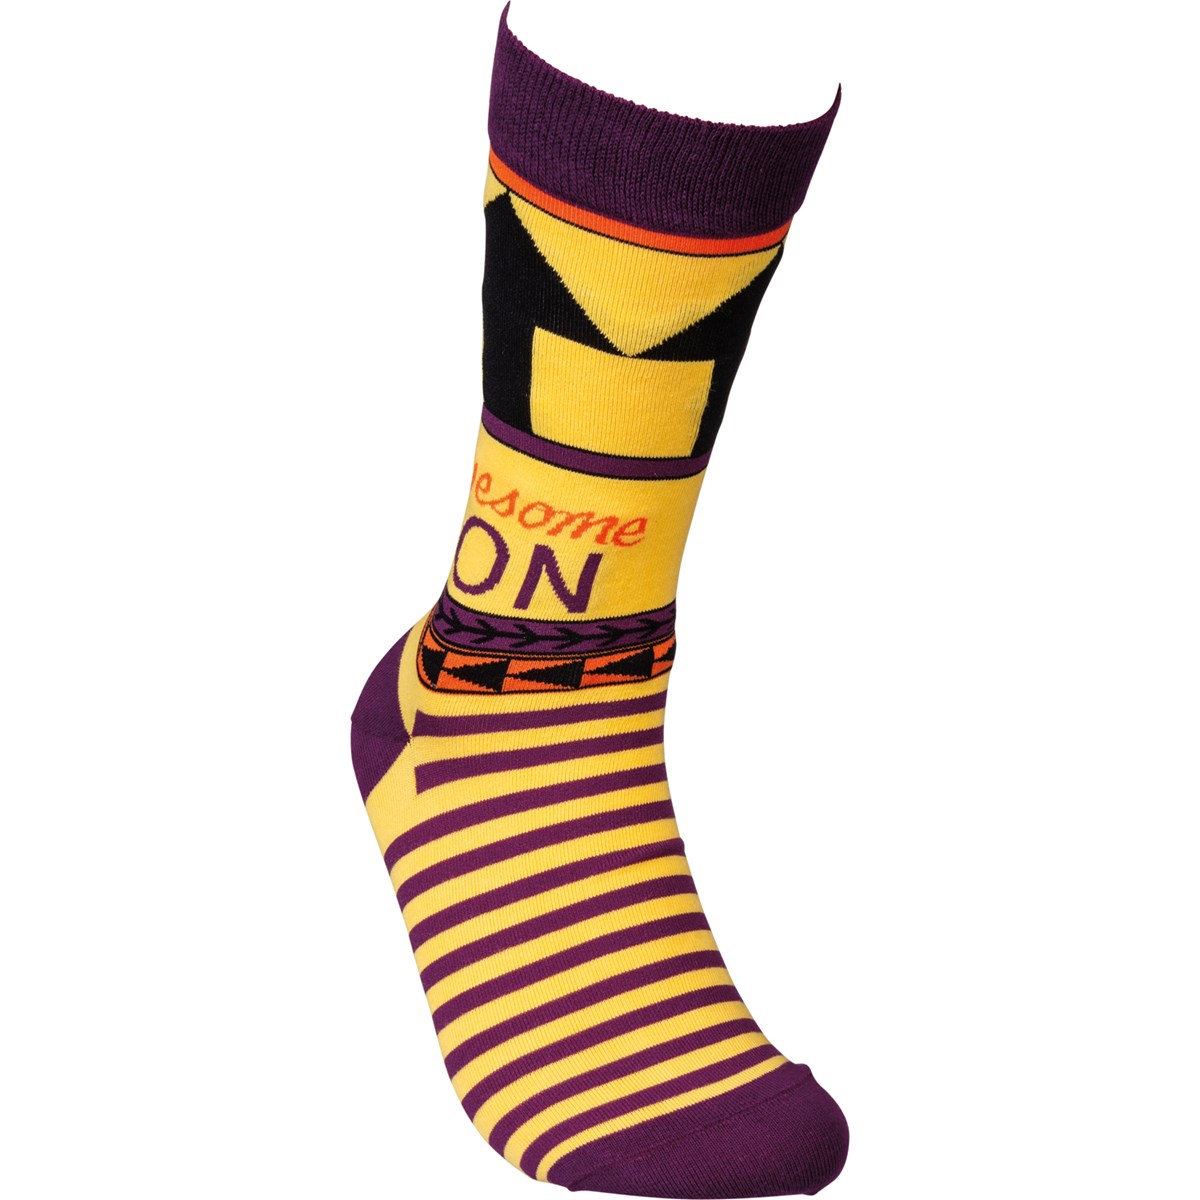 Socks - Awesome Son - One Size Fits Most - Cotton, Nylon, Spandex